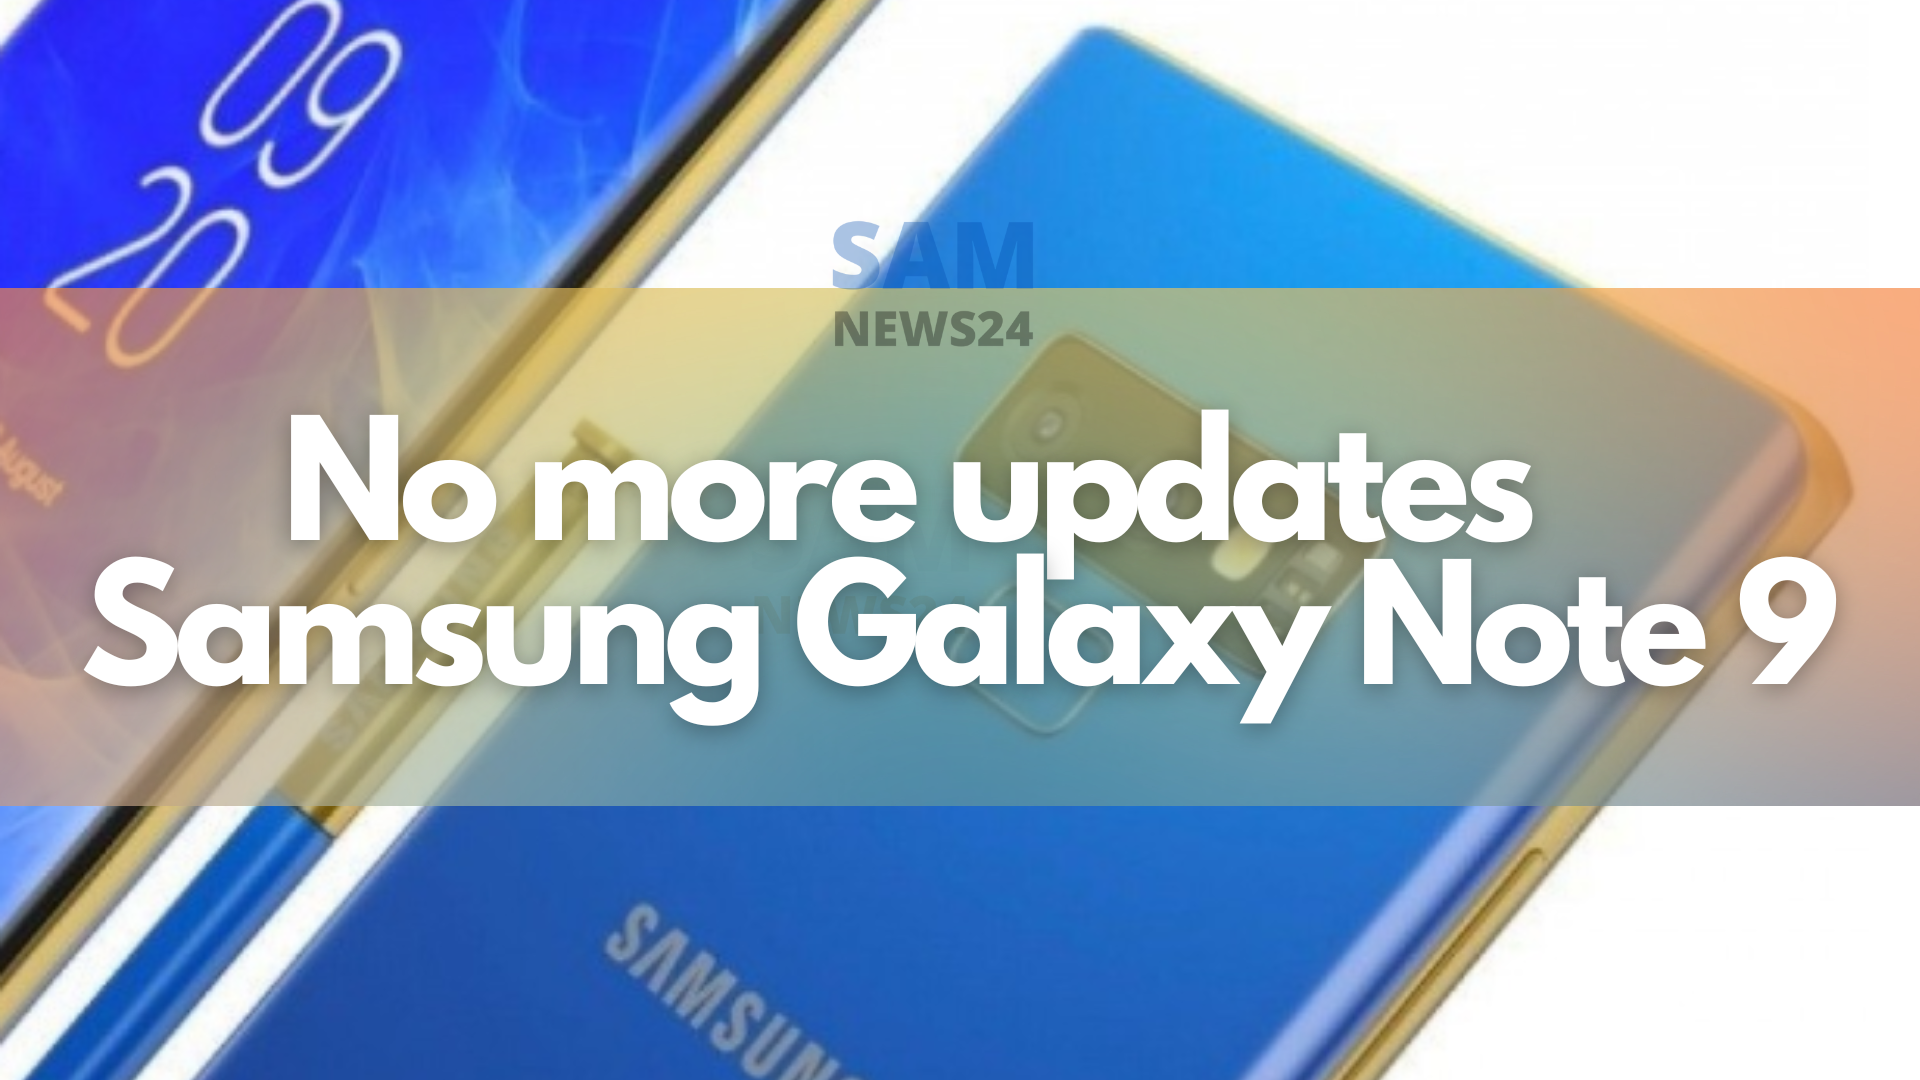 No more updates for the Samsung Galaxy Note 9